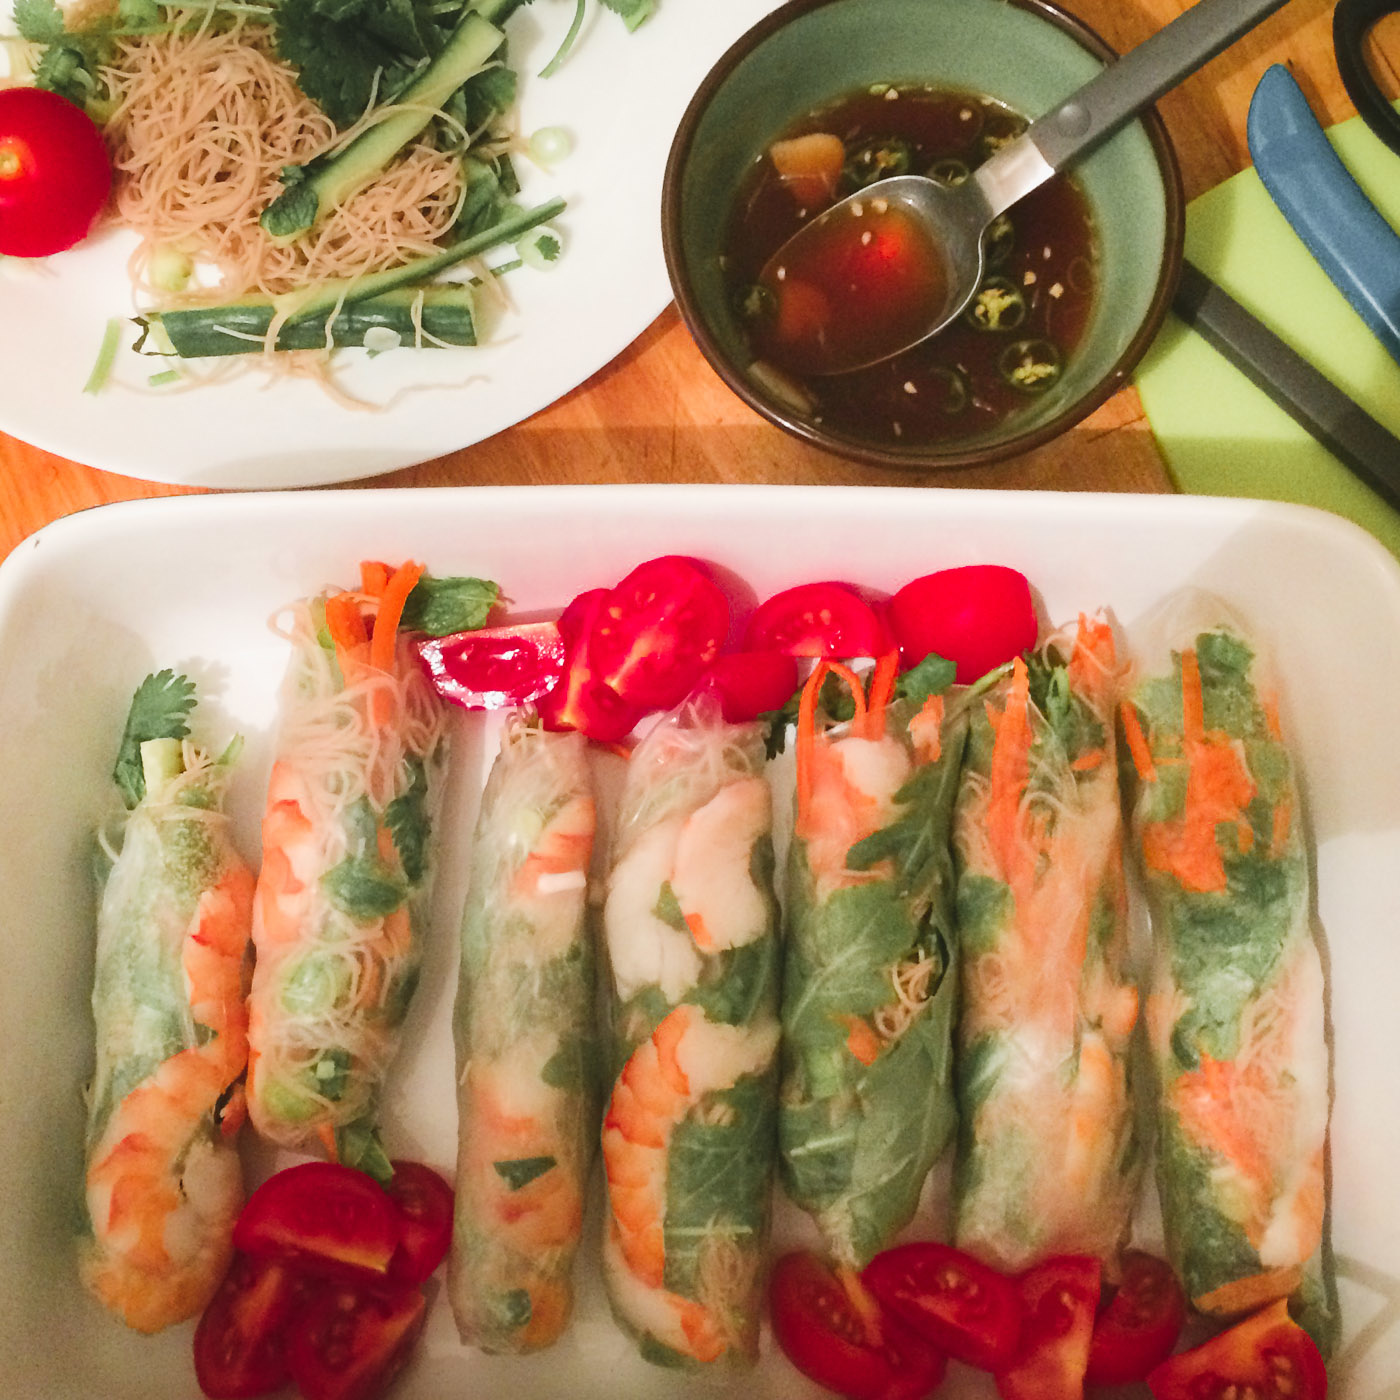 Quick fix for the summer, these fresh Spring Rolls are great for a light meal in the heat.